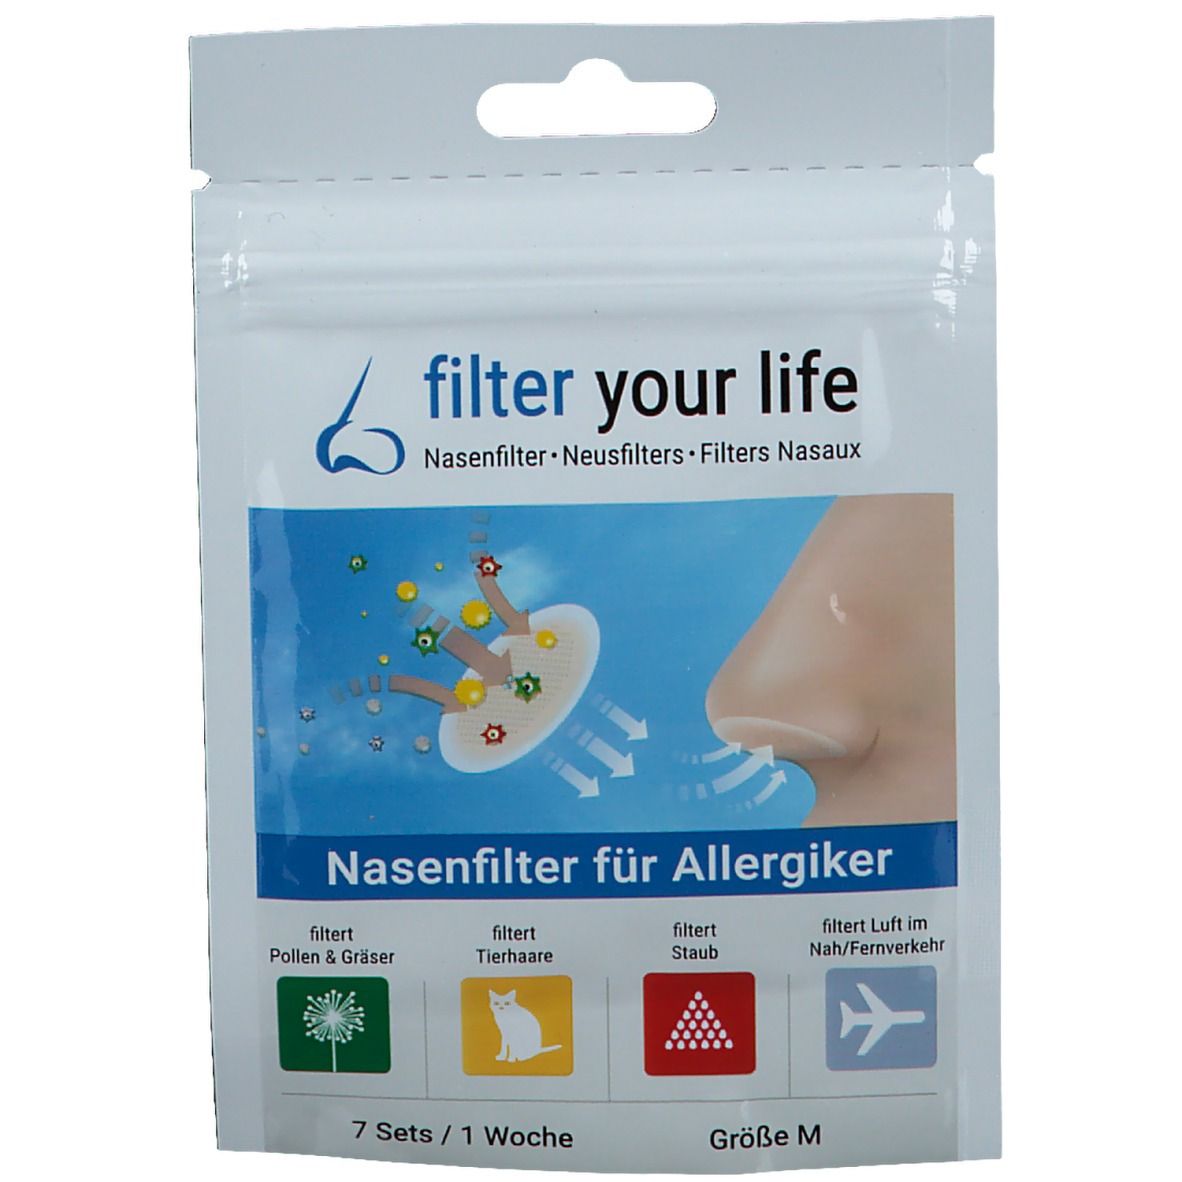 Your filters